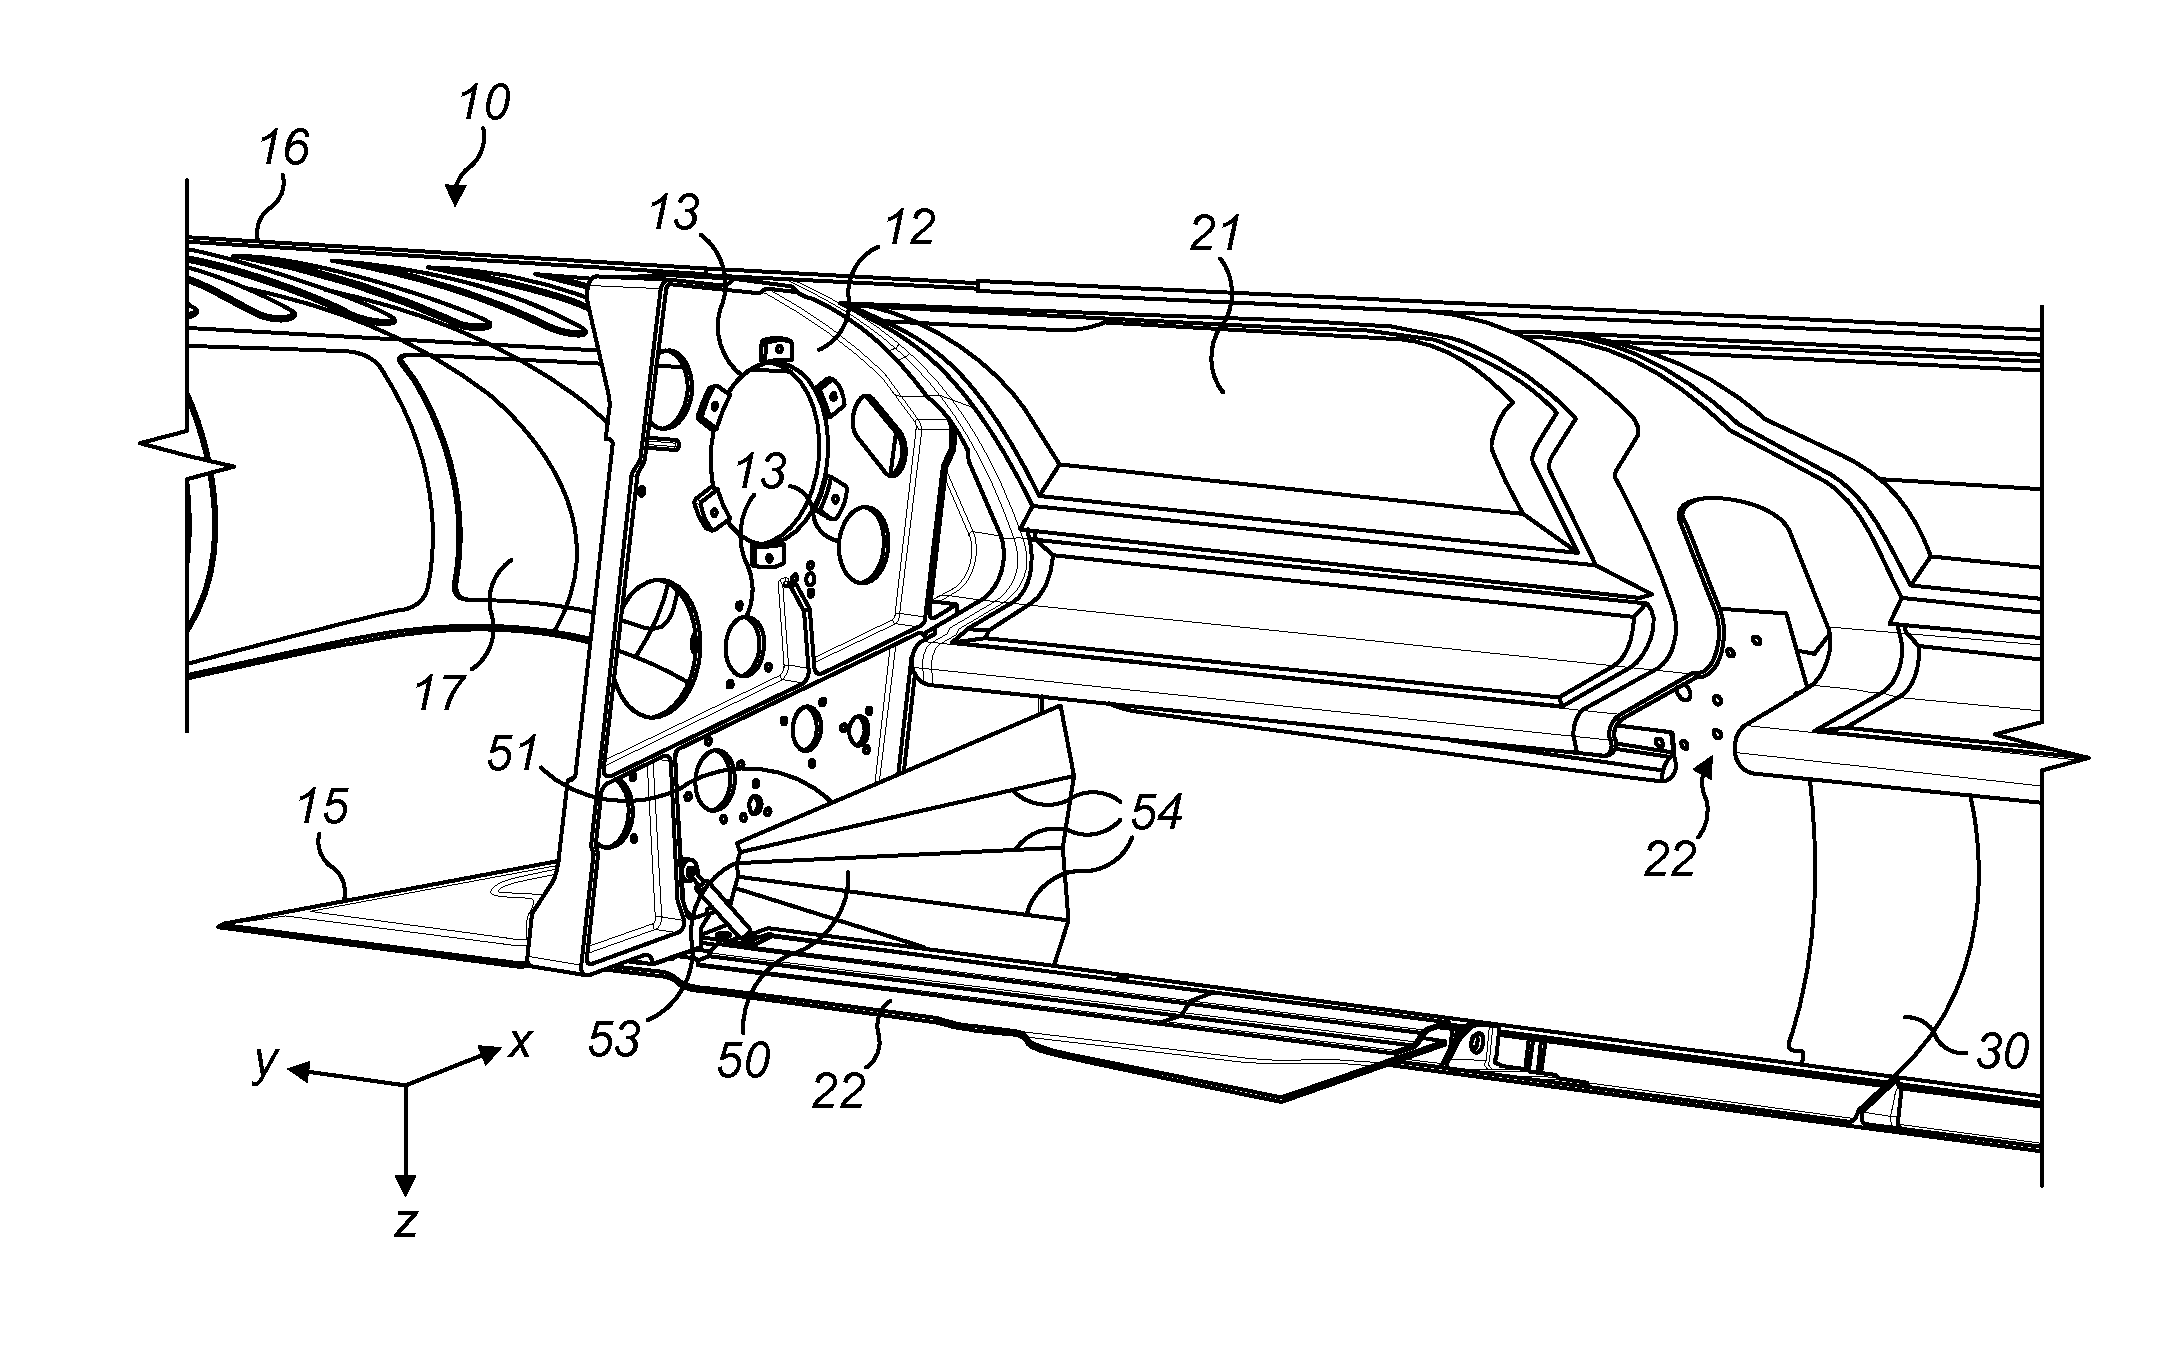 Retractable infill panel for high-lift device